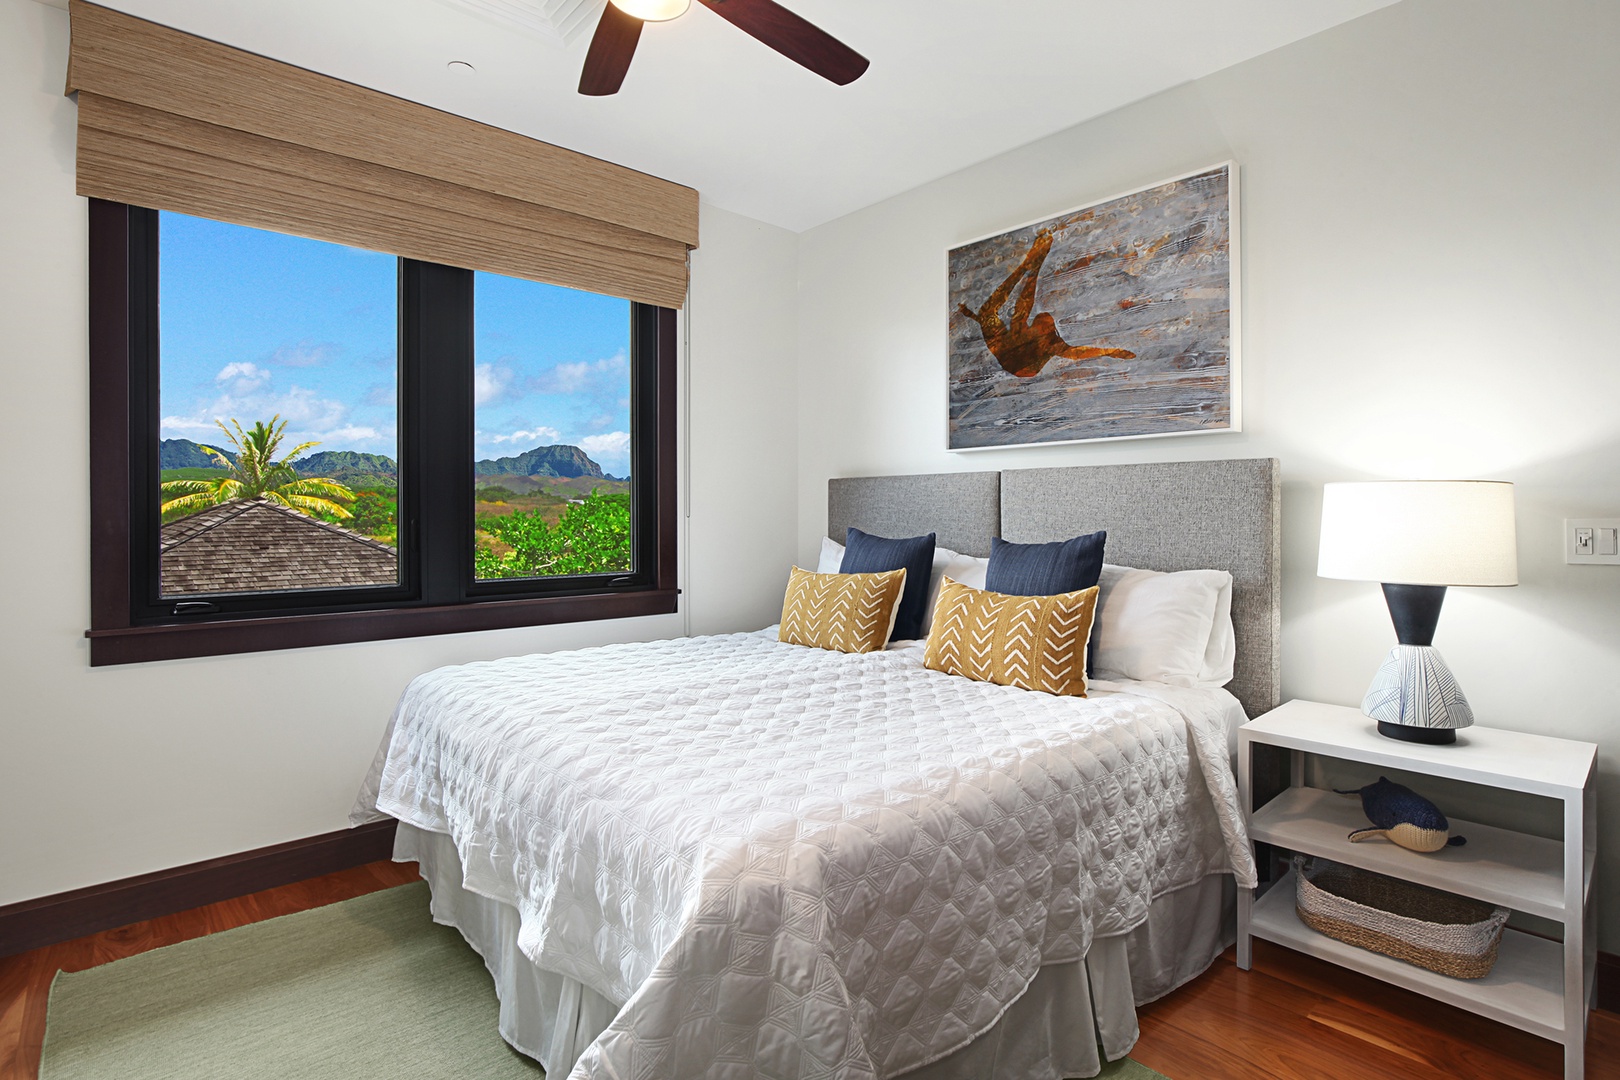 Koloa Vacation Rentals, Kukui'ula Villa #8 - Guest bedroom with twins converted to a king fi you'd like!